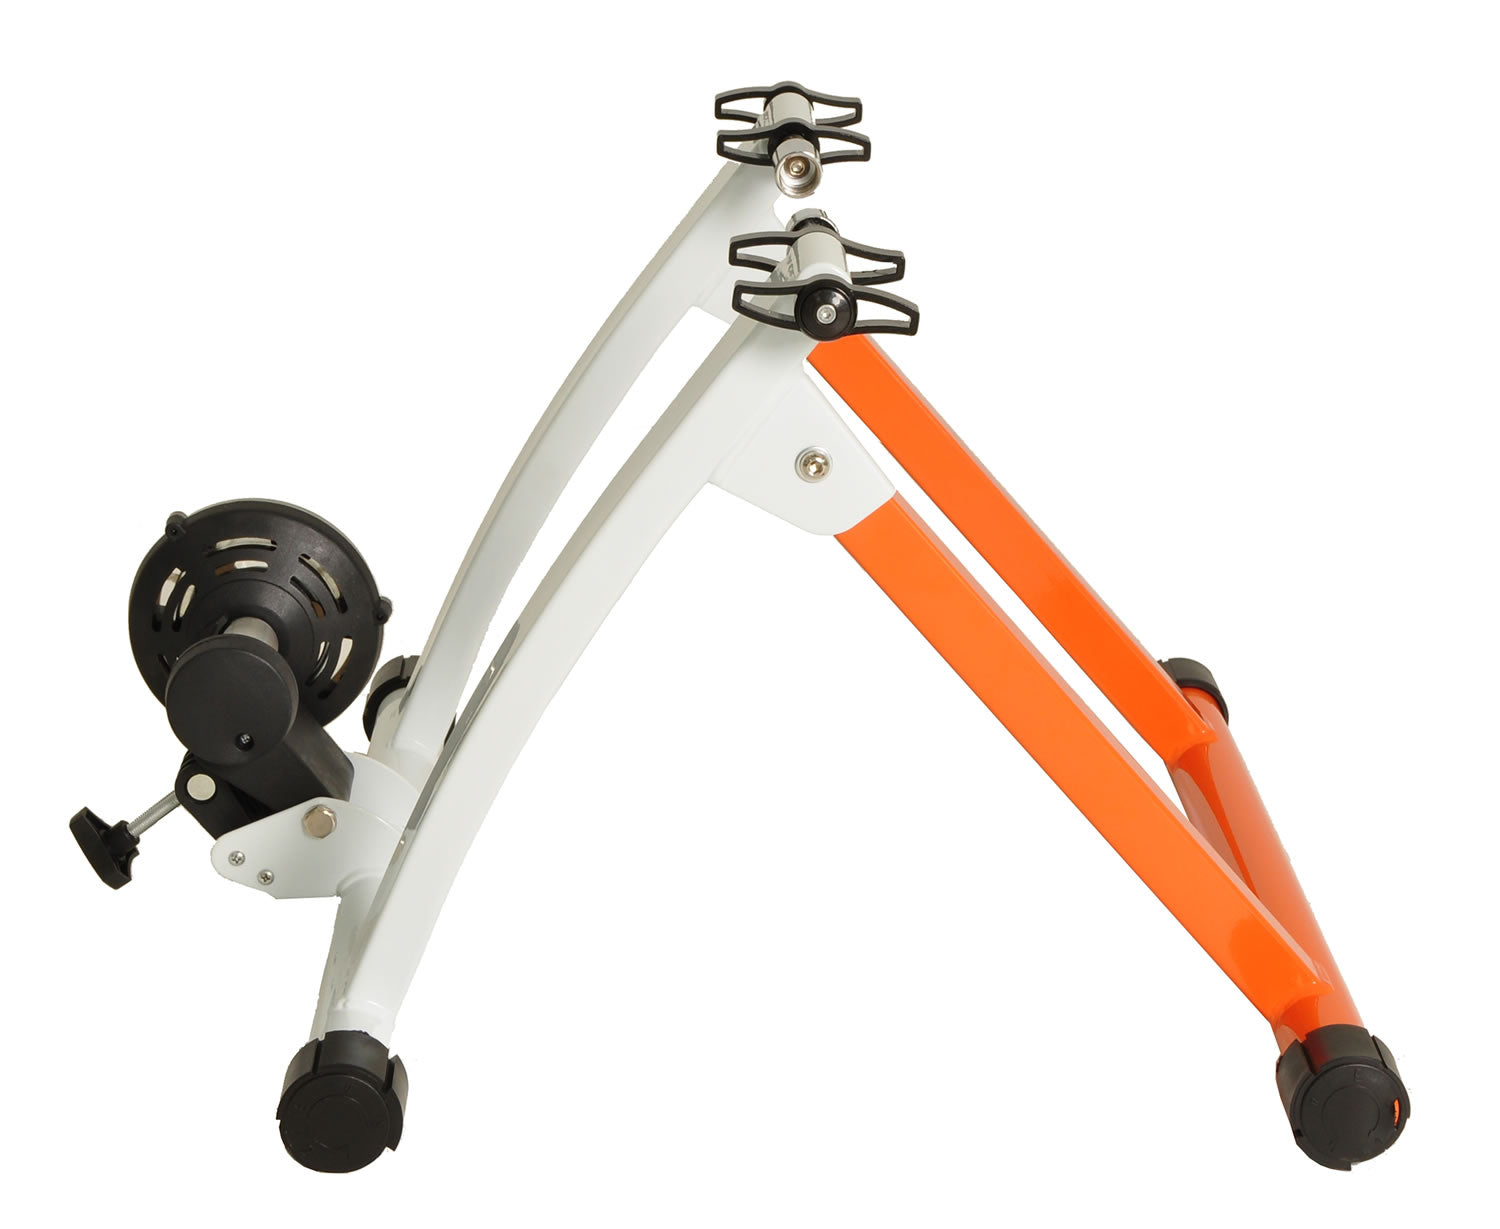 conquer magnetic bike trainer